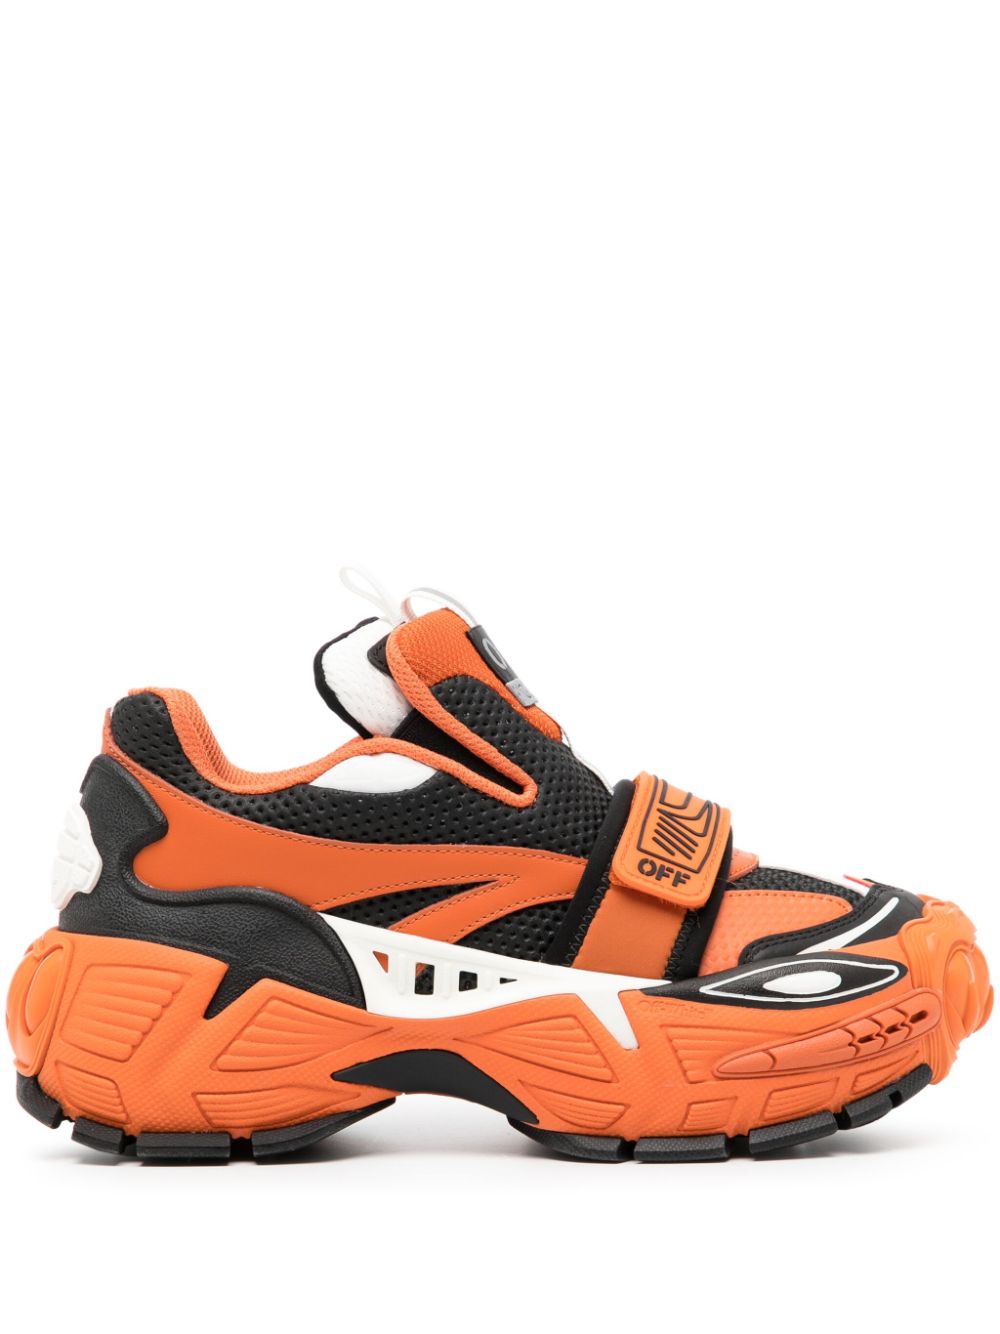 Off-white Glove Panelled Trainers In Orange